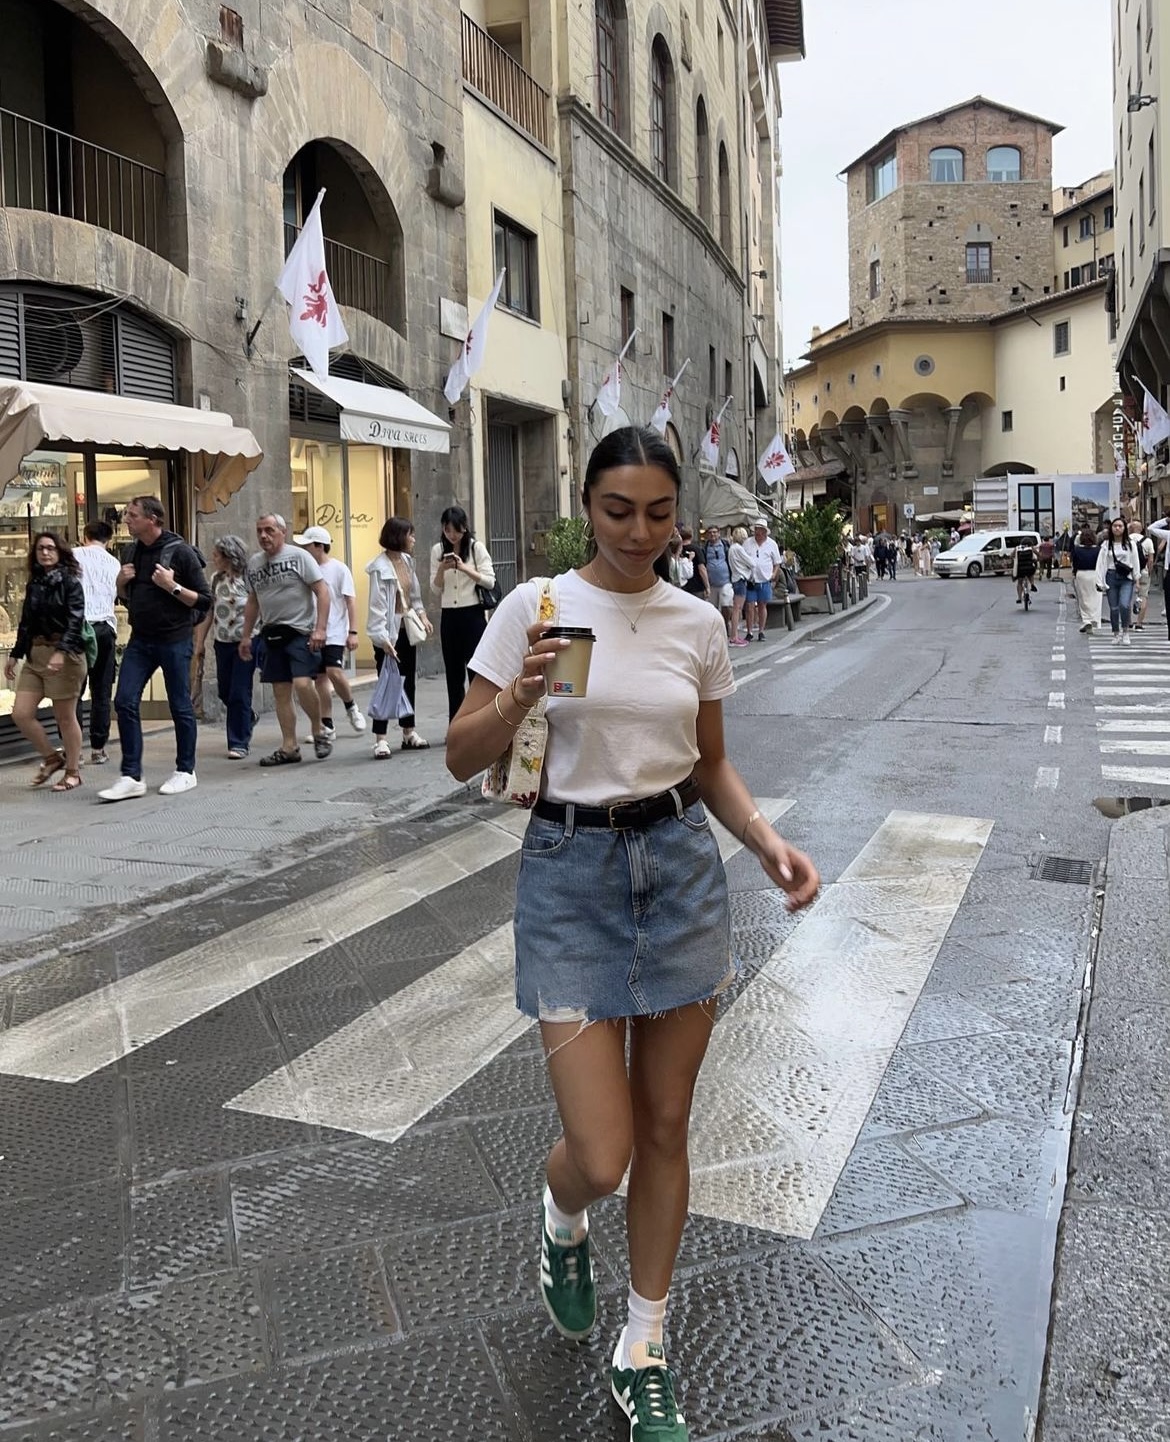 Woman walking on a cobblestone street in a chic, casual outfit with a denim skirt, white tee, and green sneakers, holding a drink.